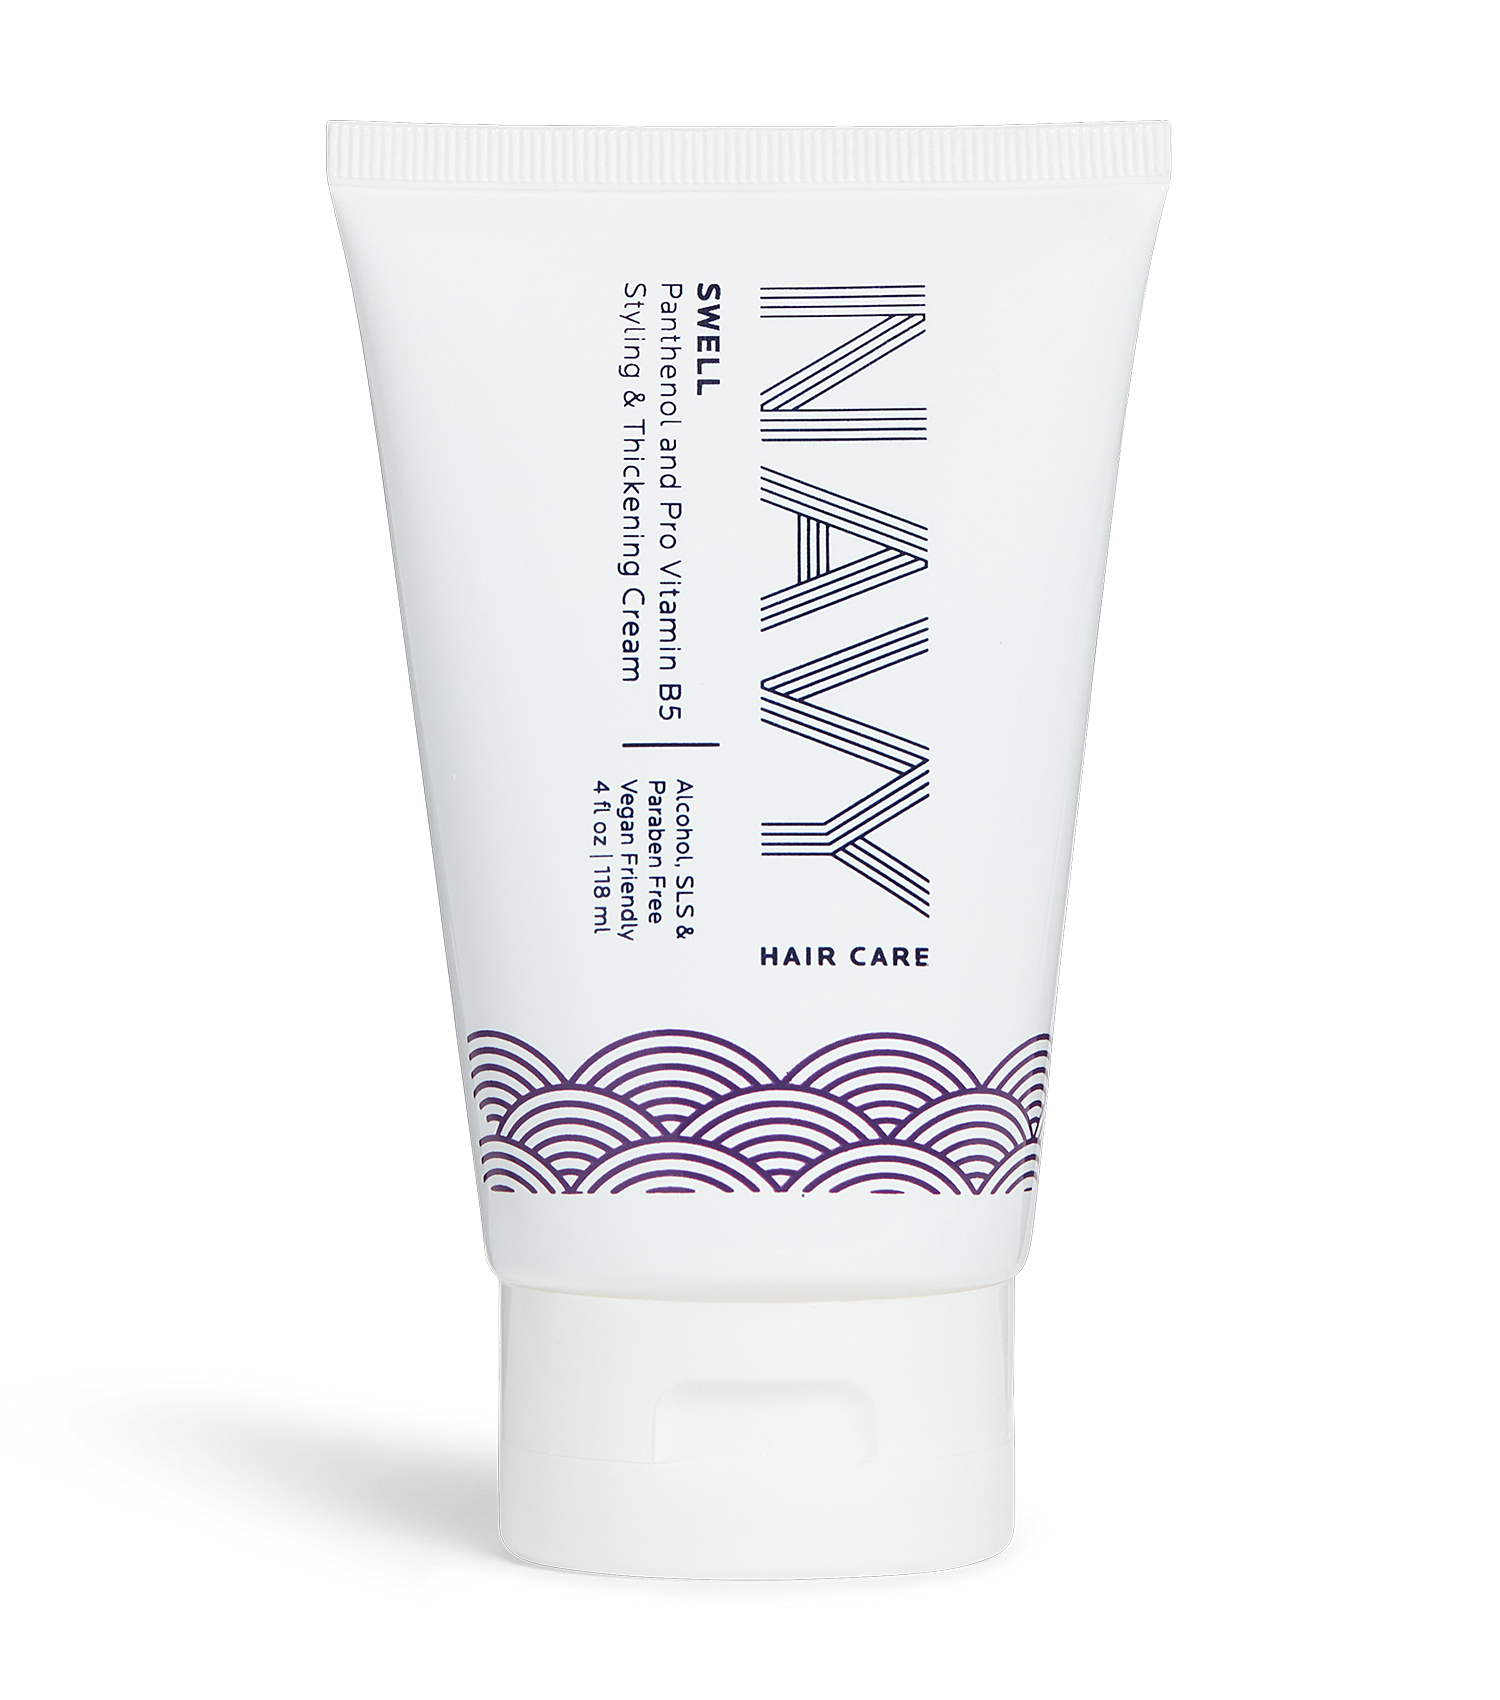 Navy Haircare - SWELL STYLING AND THICKENING CREAM Navy Haircare - SWELL STYLING AND THICKENING CREAM 1